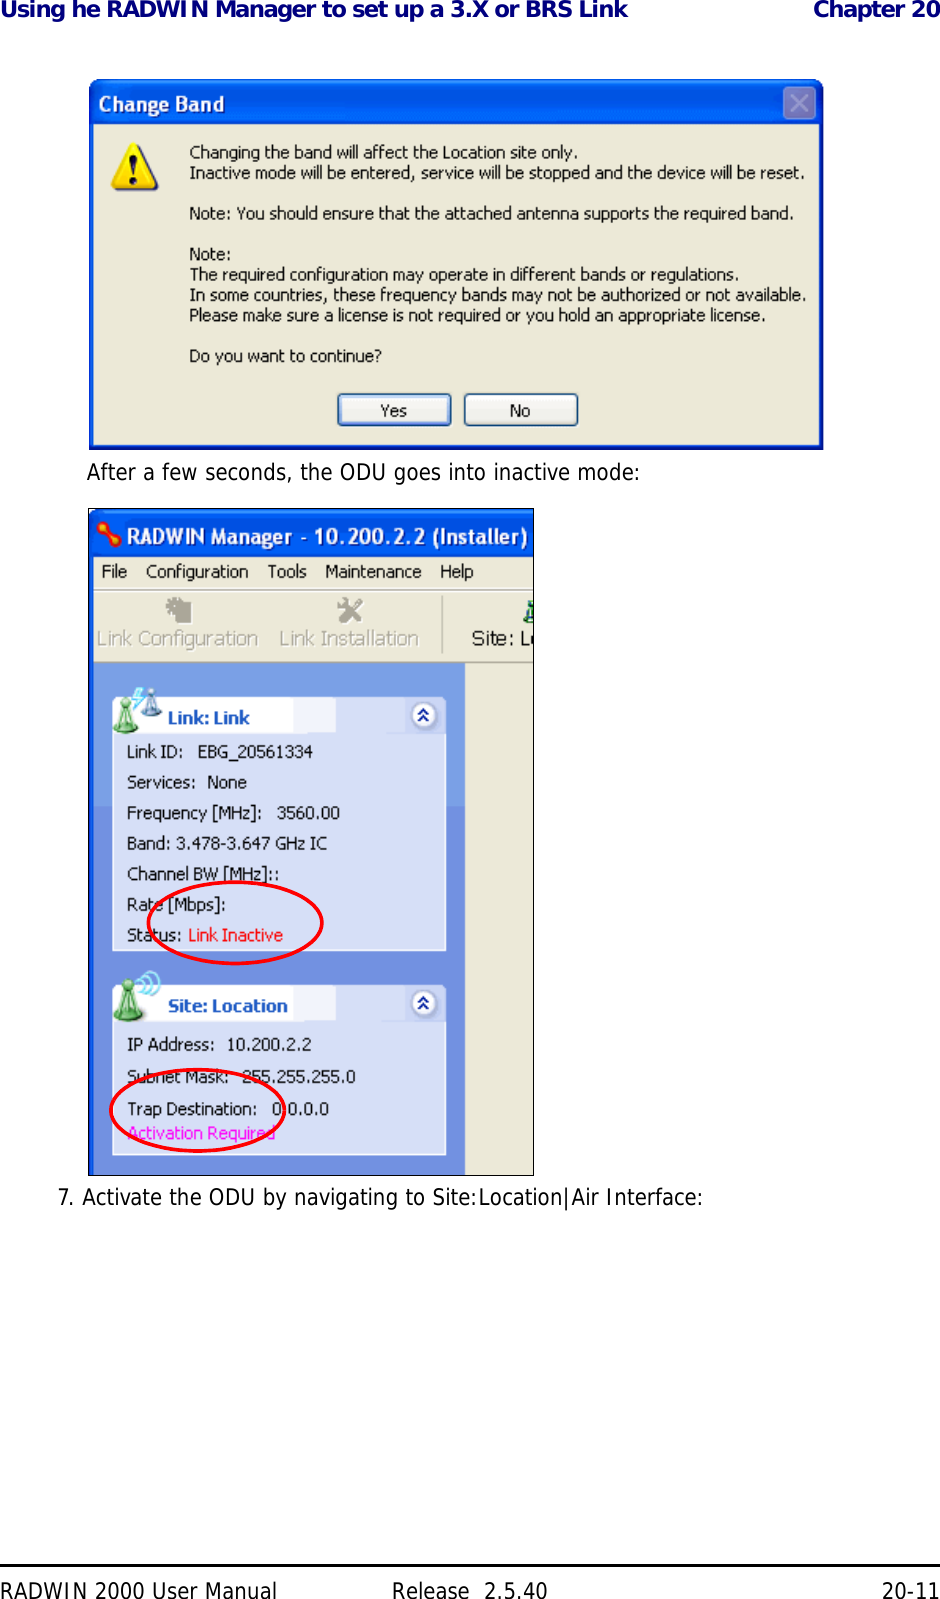 Using he RADWIN Manager to set up a 3.X or BRS Link Chapter 20RADWIN 2000 User Manual Release  2.5.40 20-11After a few seconds, the ODU goes into inactive mode:7. Activate the ODU by navigating to Site:Location|Air Interface: